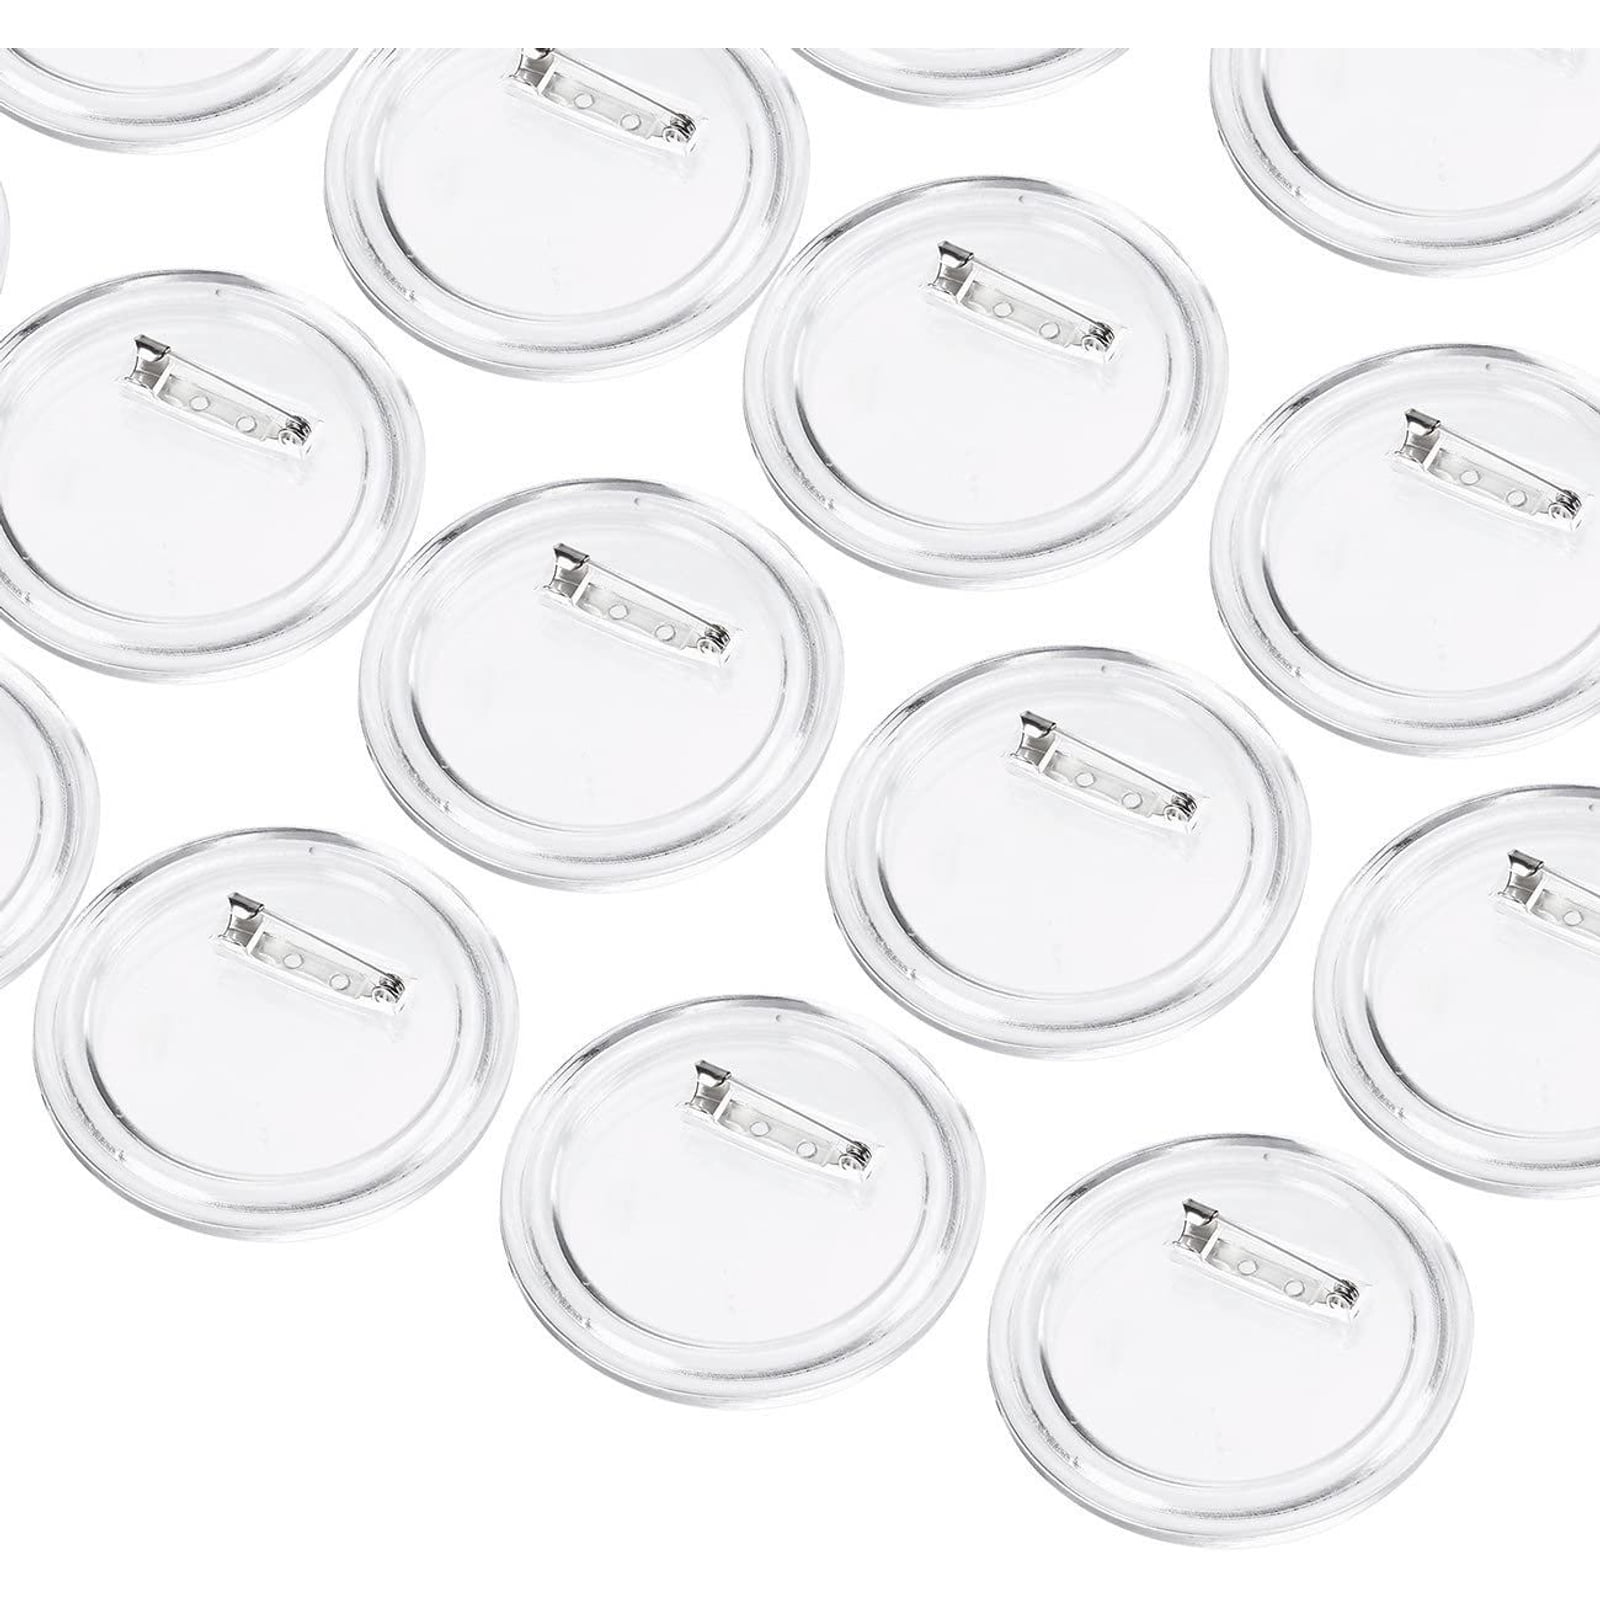 DIY Badges 50 Pack Acrylic Design Button Badge Clear Button Pin Badges Kit for Craft Supplies 2.25Inch 